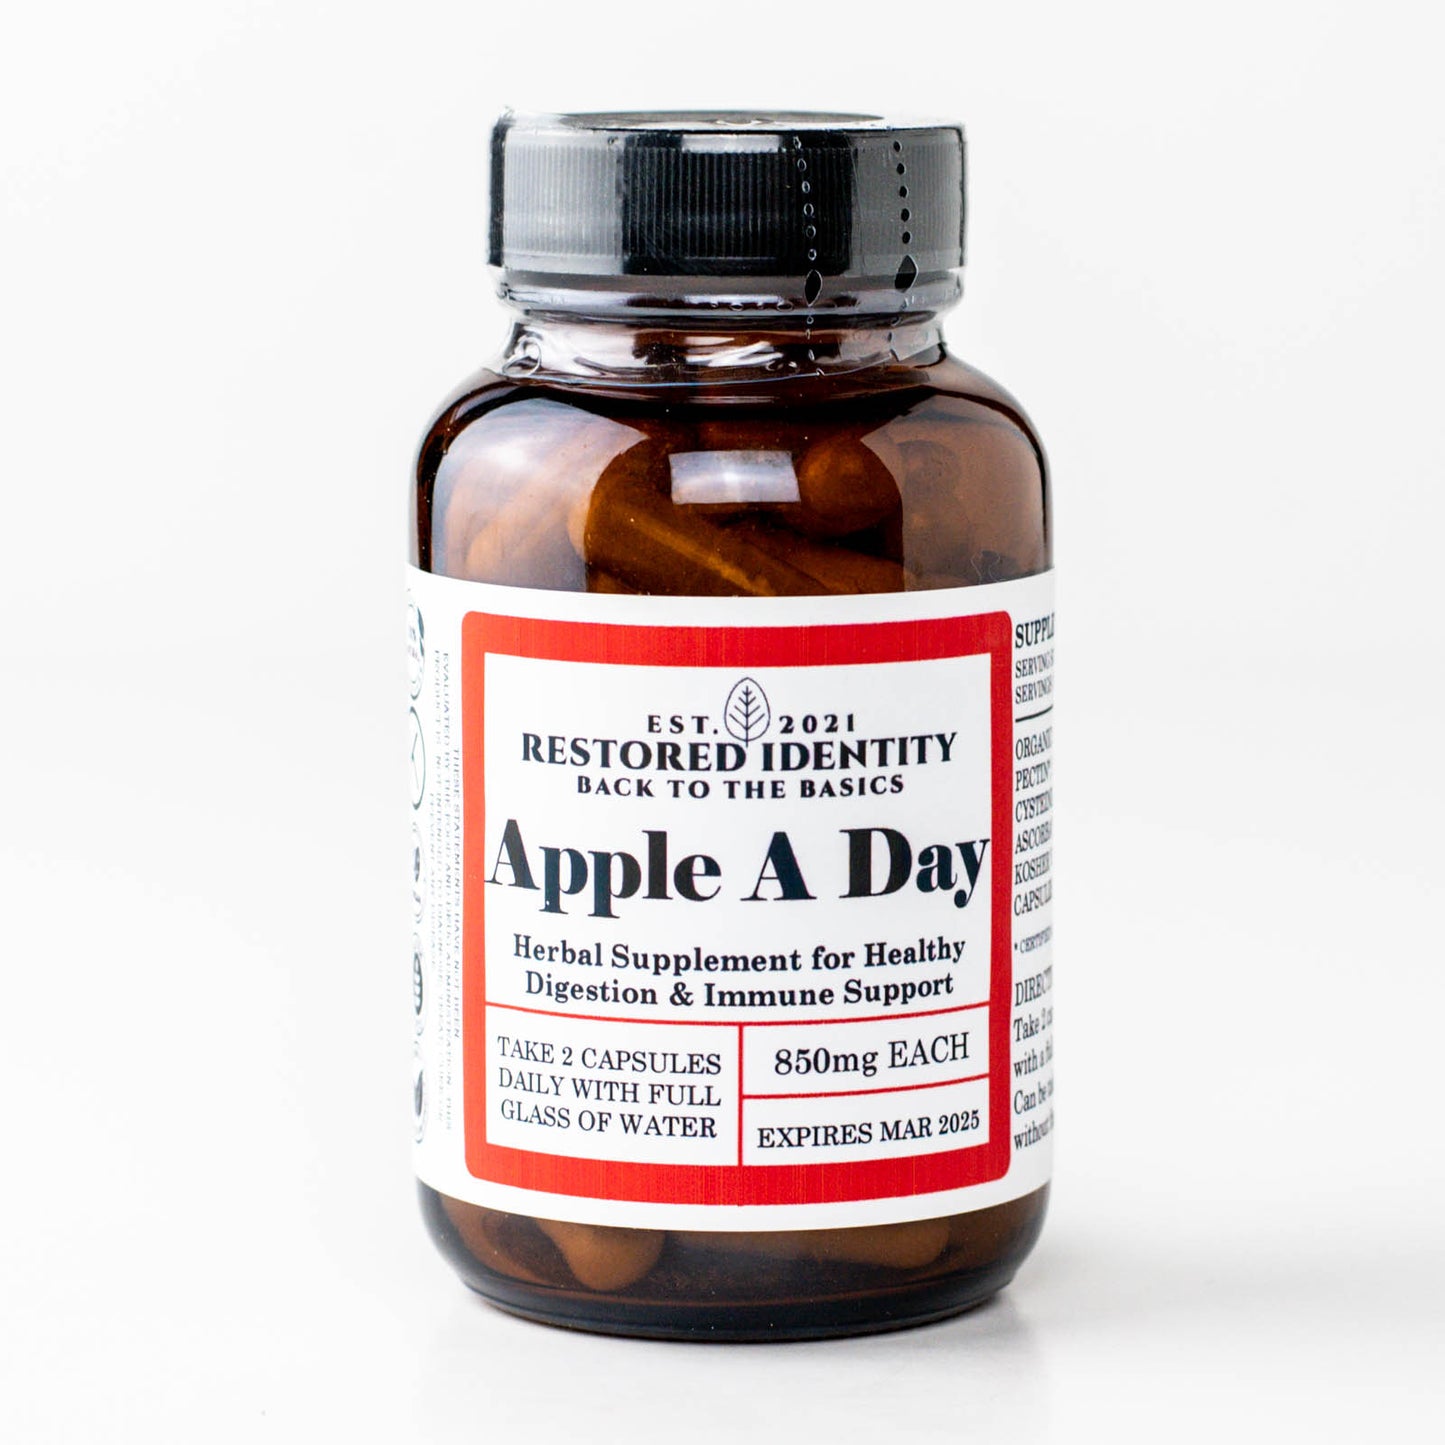 Apple a Day Capsules